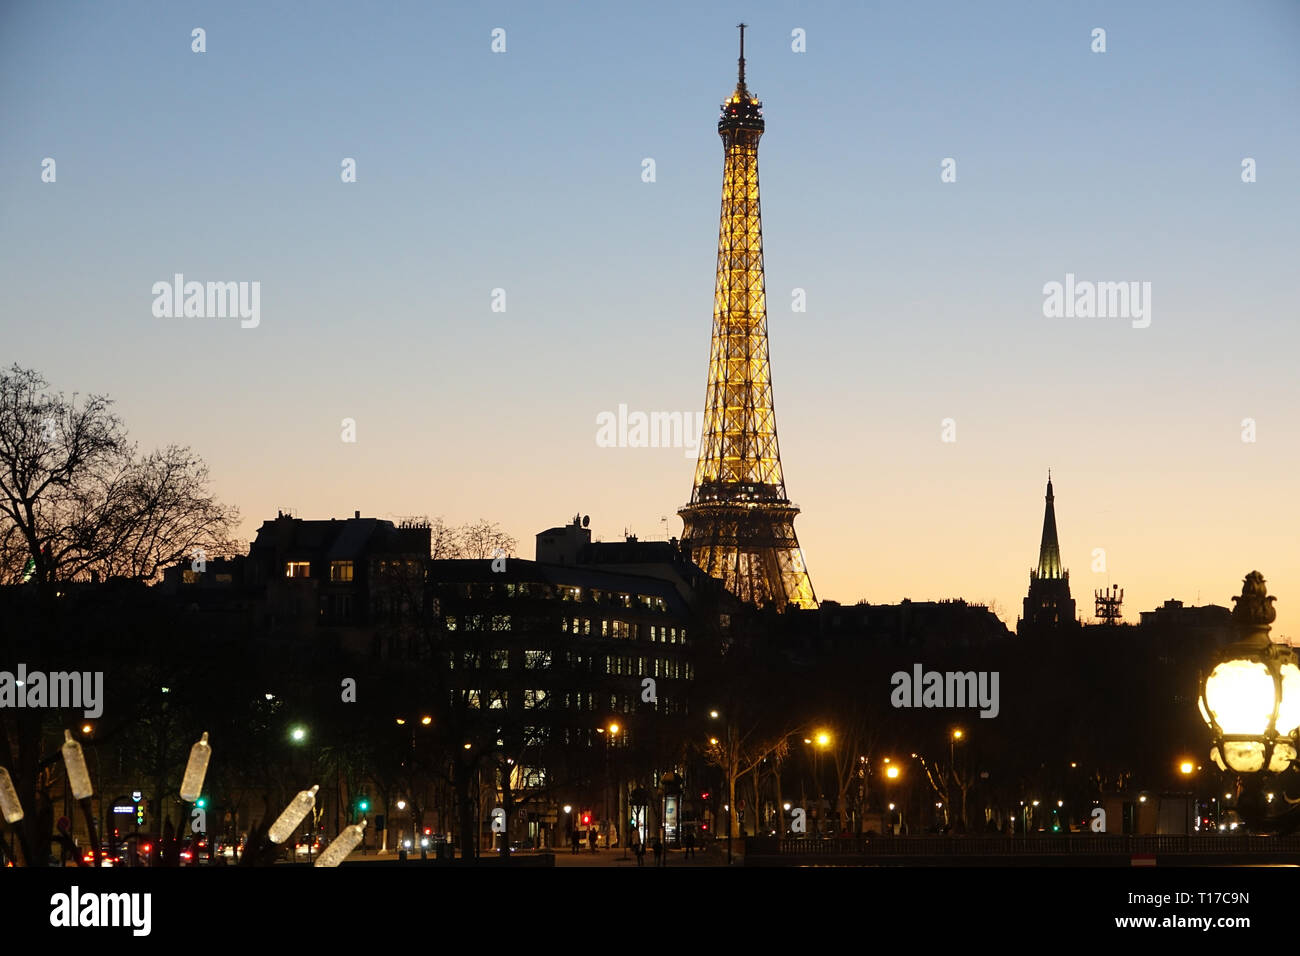 PARIS-FRANCE-FEB 25, 2019: The Eiffel Tower is a wrought-iron lattice tower on the Champ de Mars in Paris, France. It is named after the engineer Gust Stock Photo